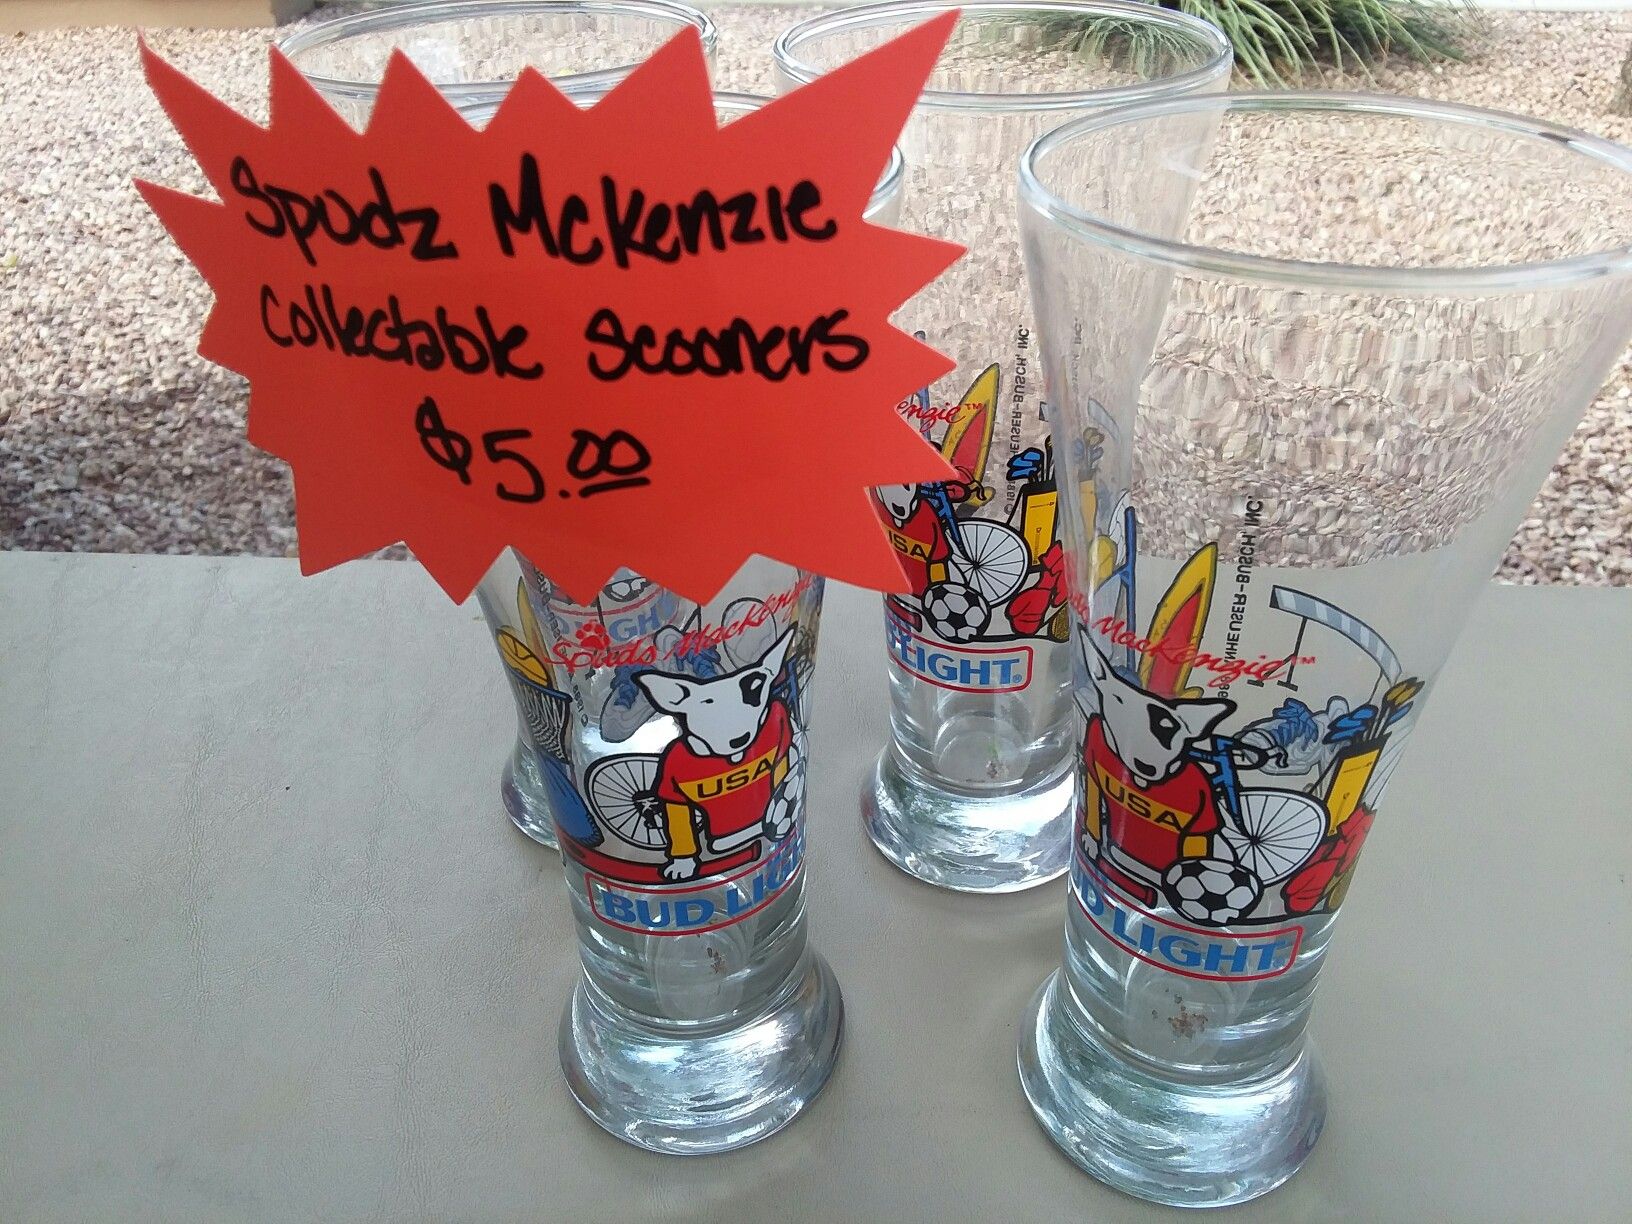 Collectable Spuds McKenzie glasses